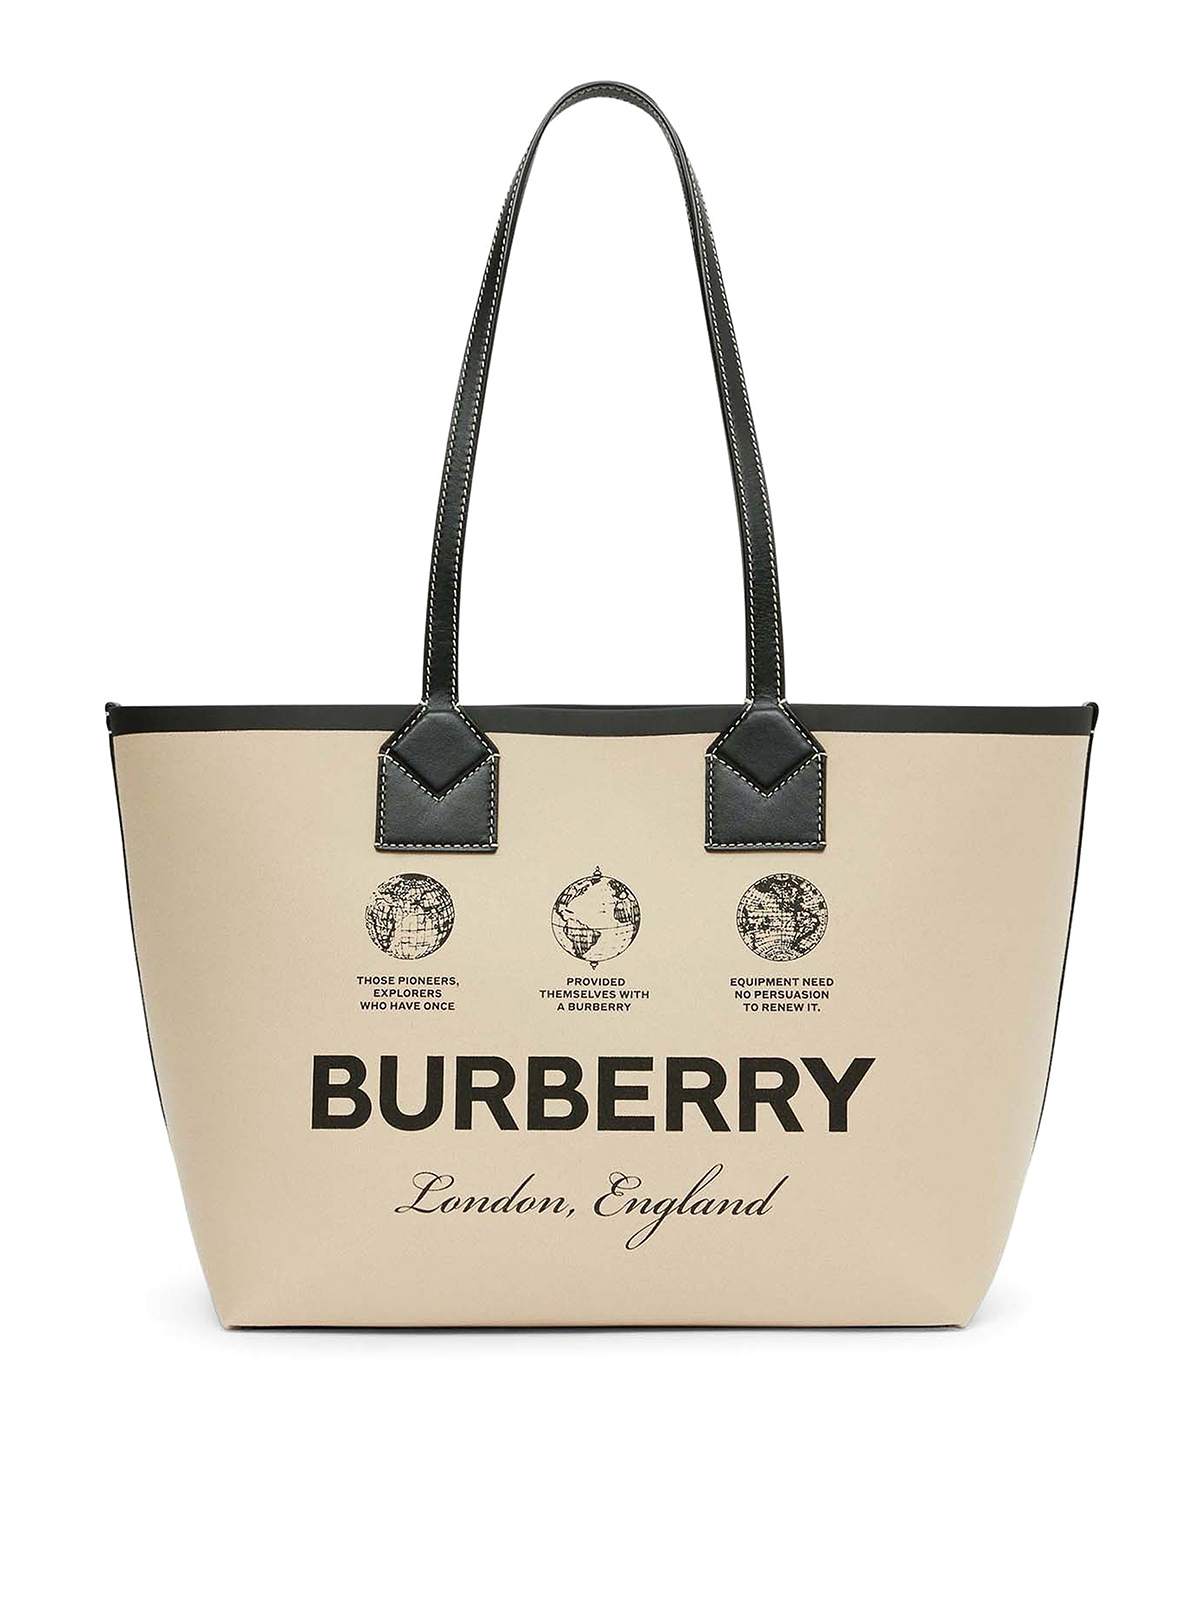 Totes bags Burberry - Leather bag with logo and tartan interior - 8063120